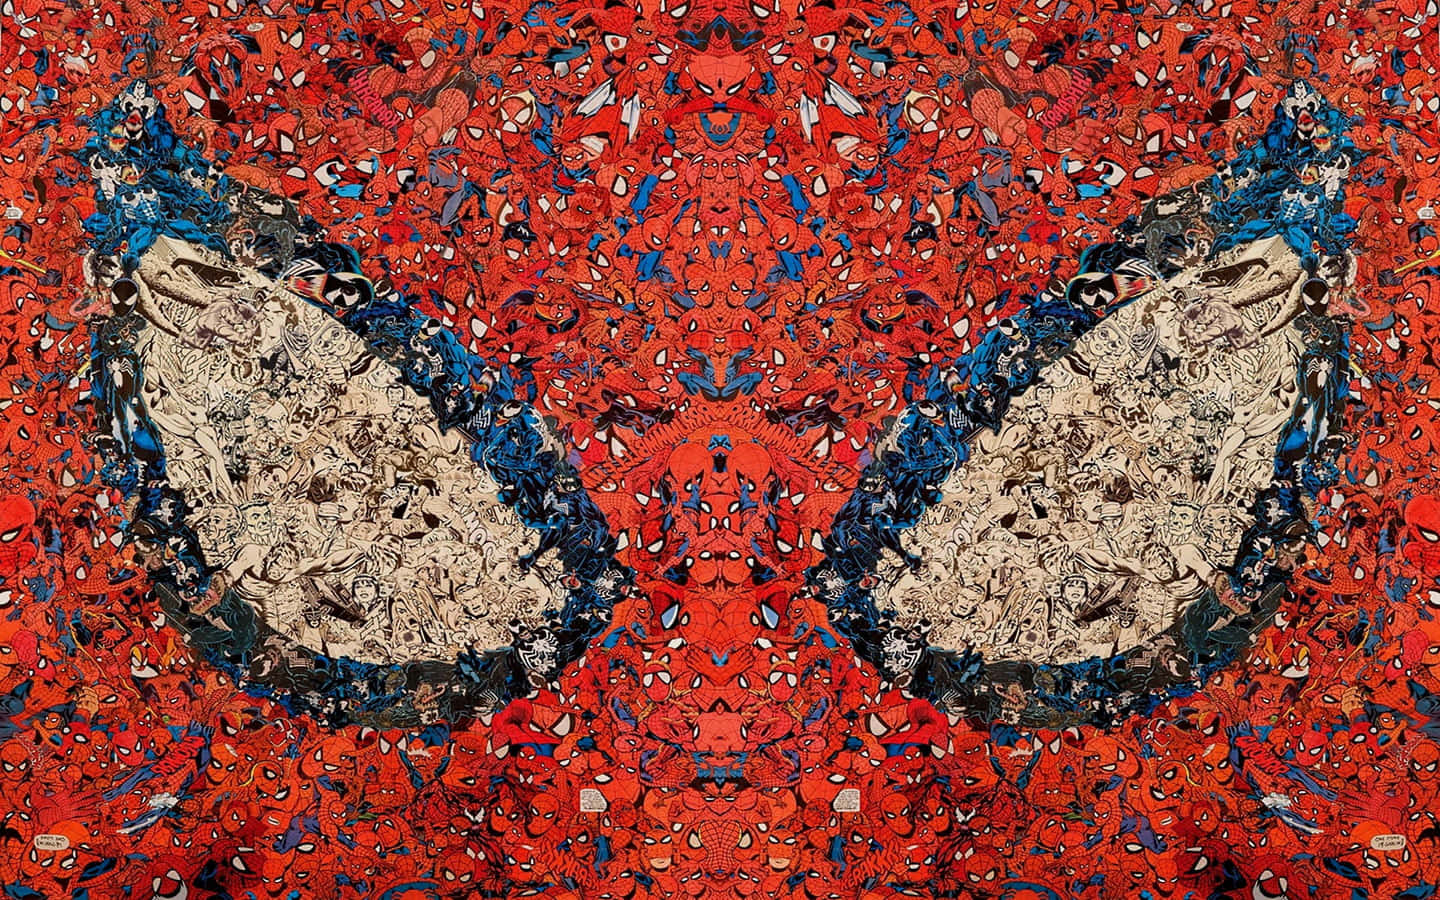 Spider - Man's Face In Red And Blue Paint Background